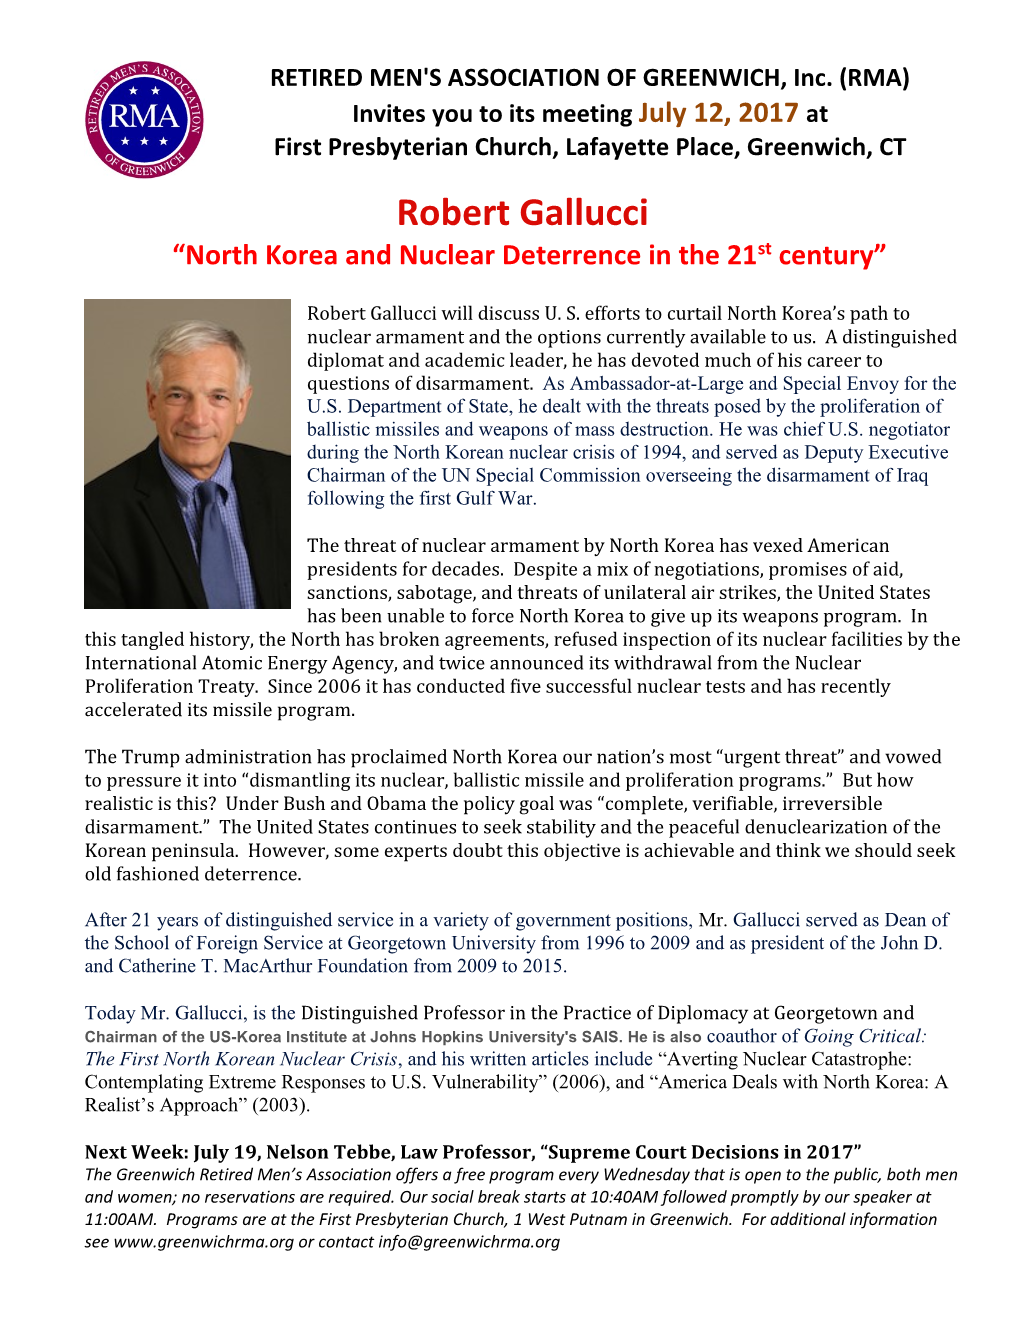 Robert Gallucci “North Korea and Nuclear Deterrence in the 21St Century”